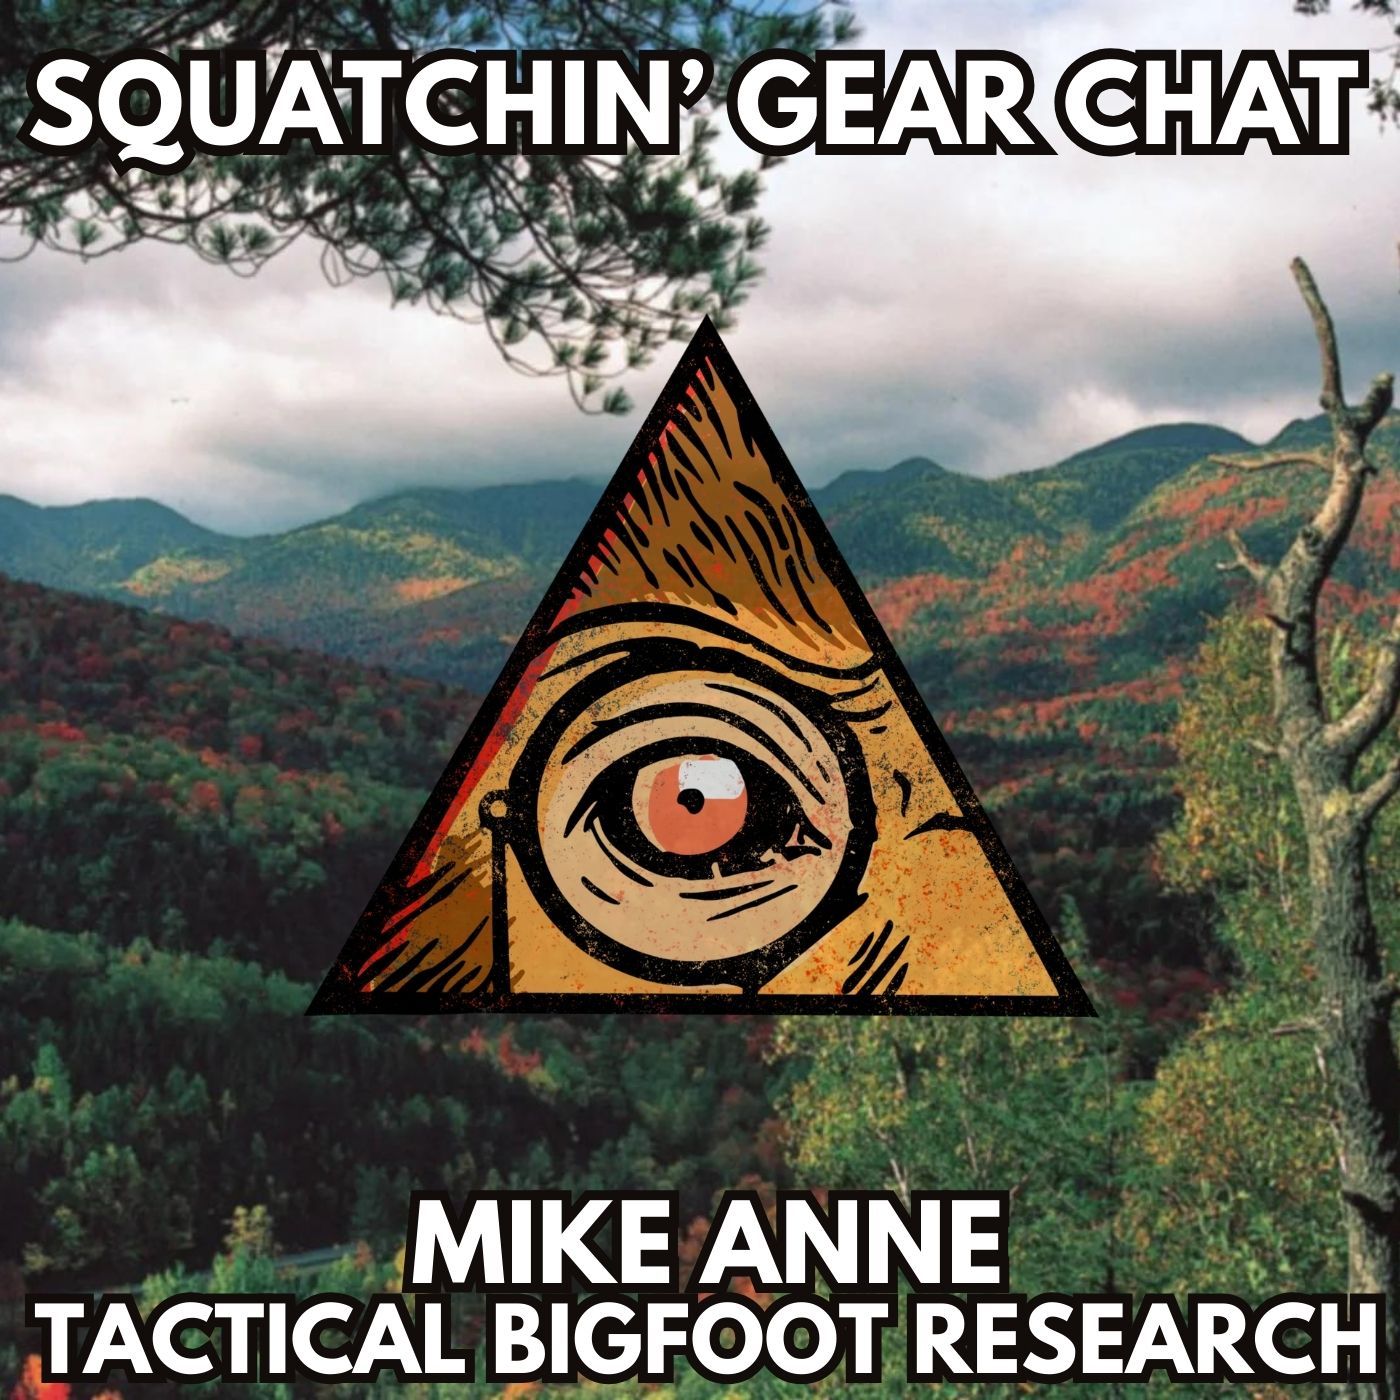 Squatchin' Gear Chat with Mike Anne, Tactical Bigfoot Research